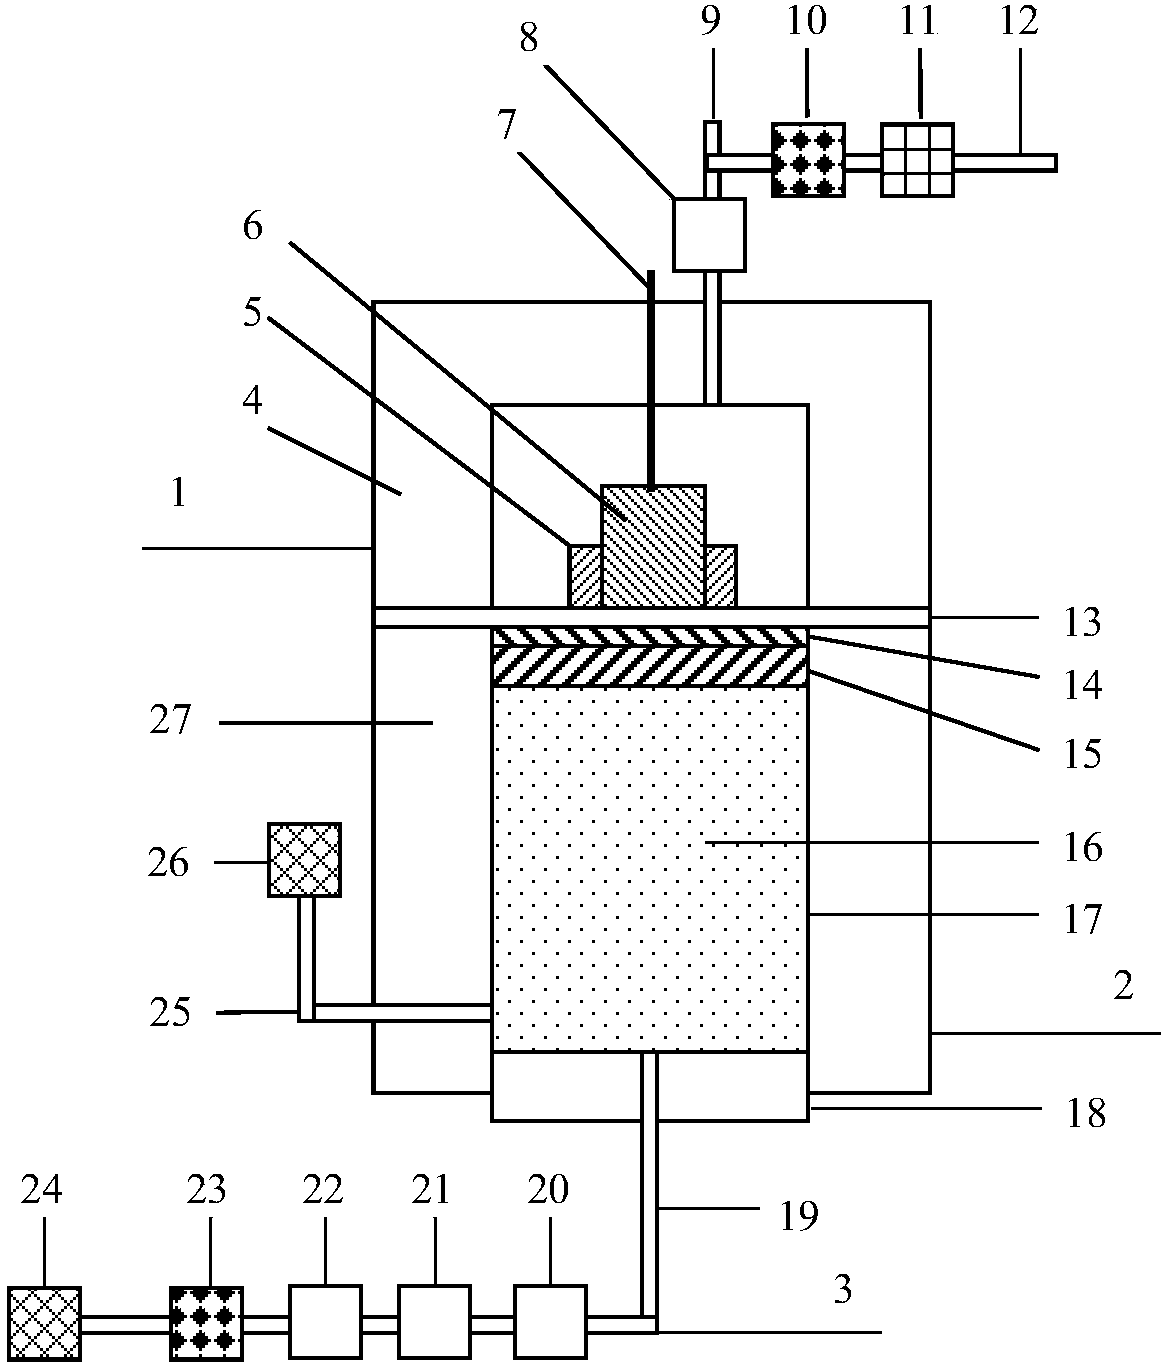 Experimental process and equipment of repeated perforation of same hole